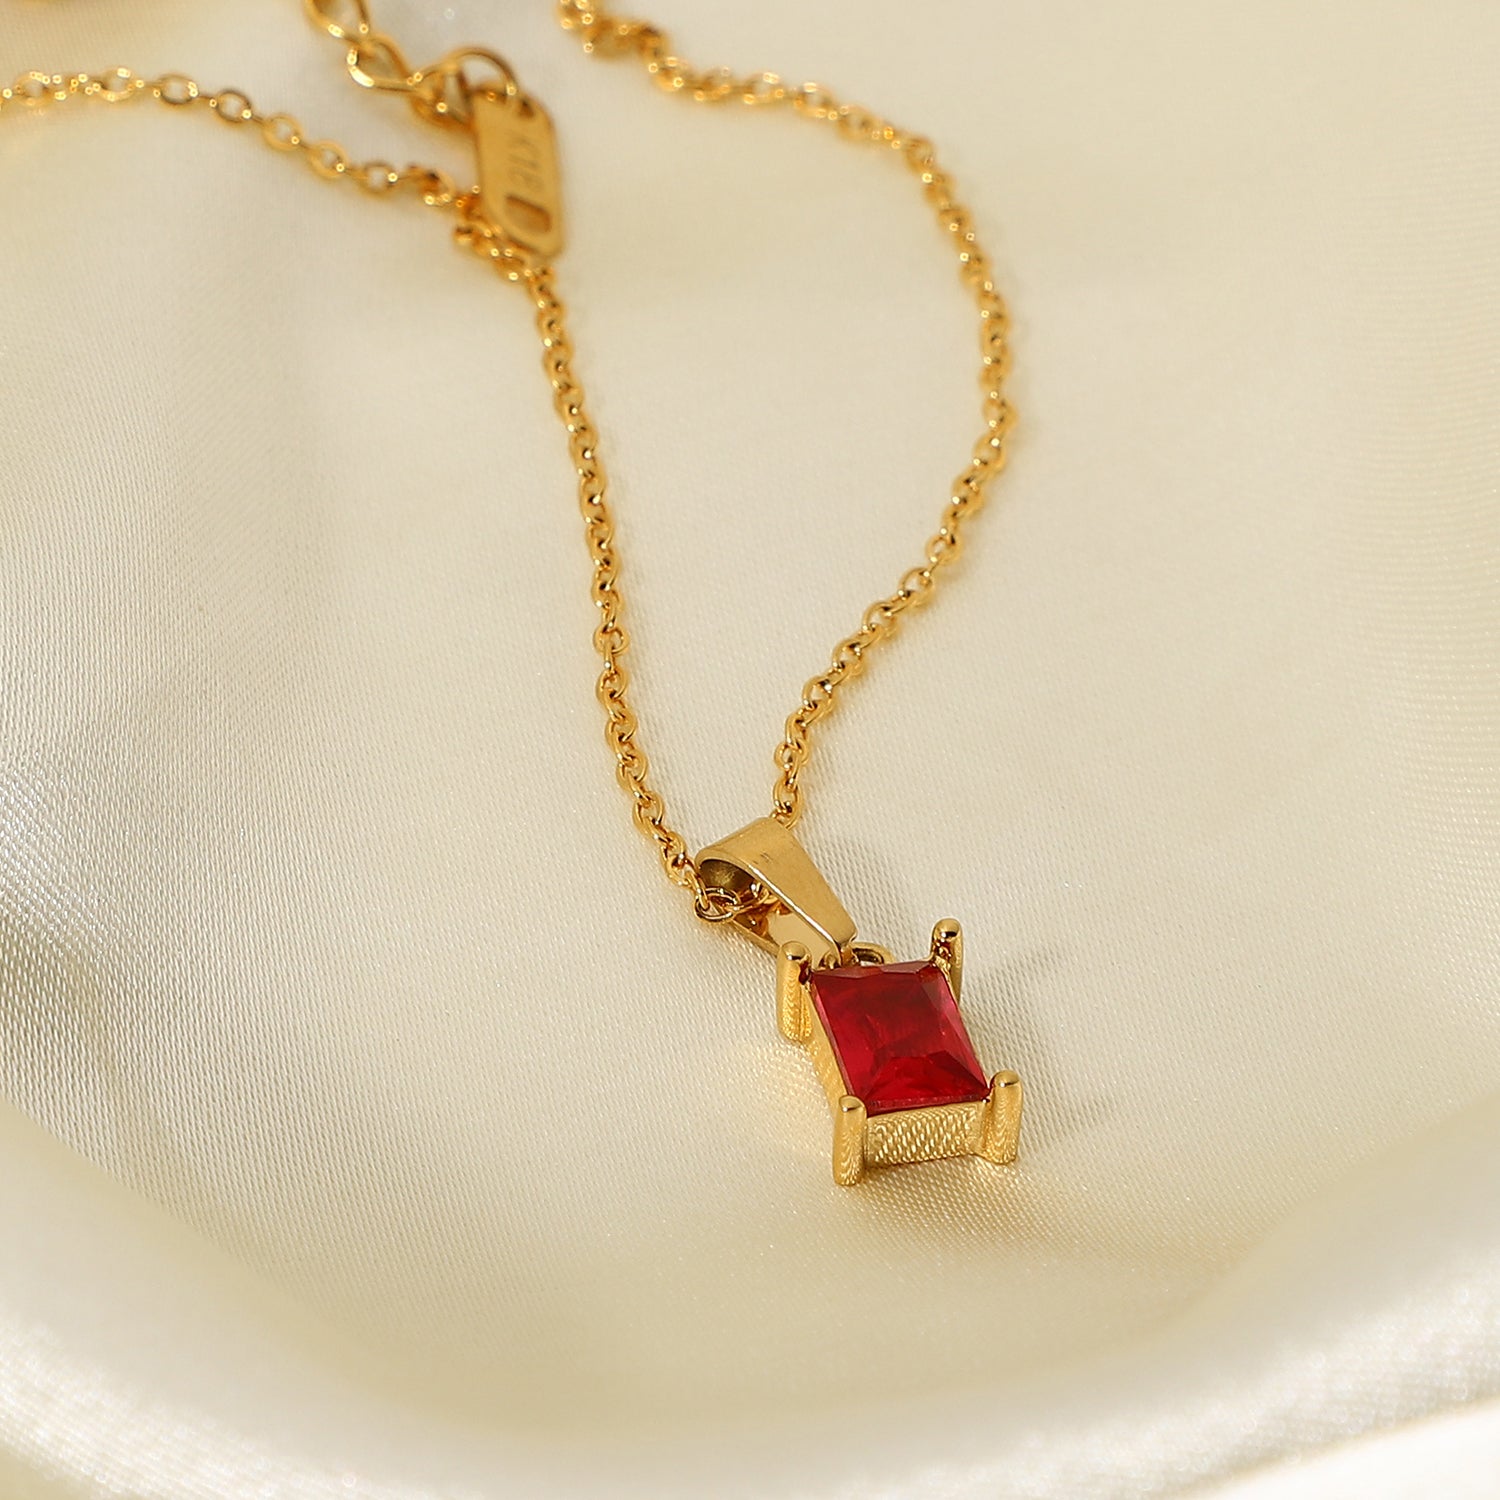 Gold Necklace with a Square Red Cubic Zirconia